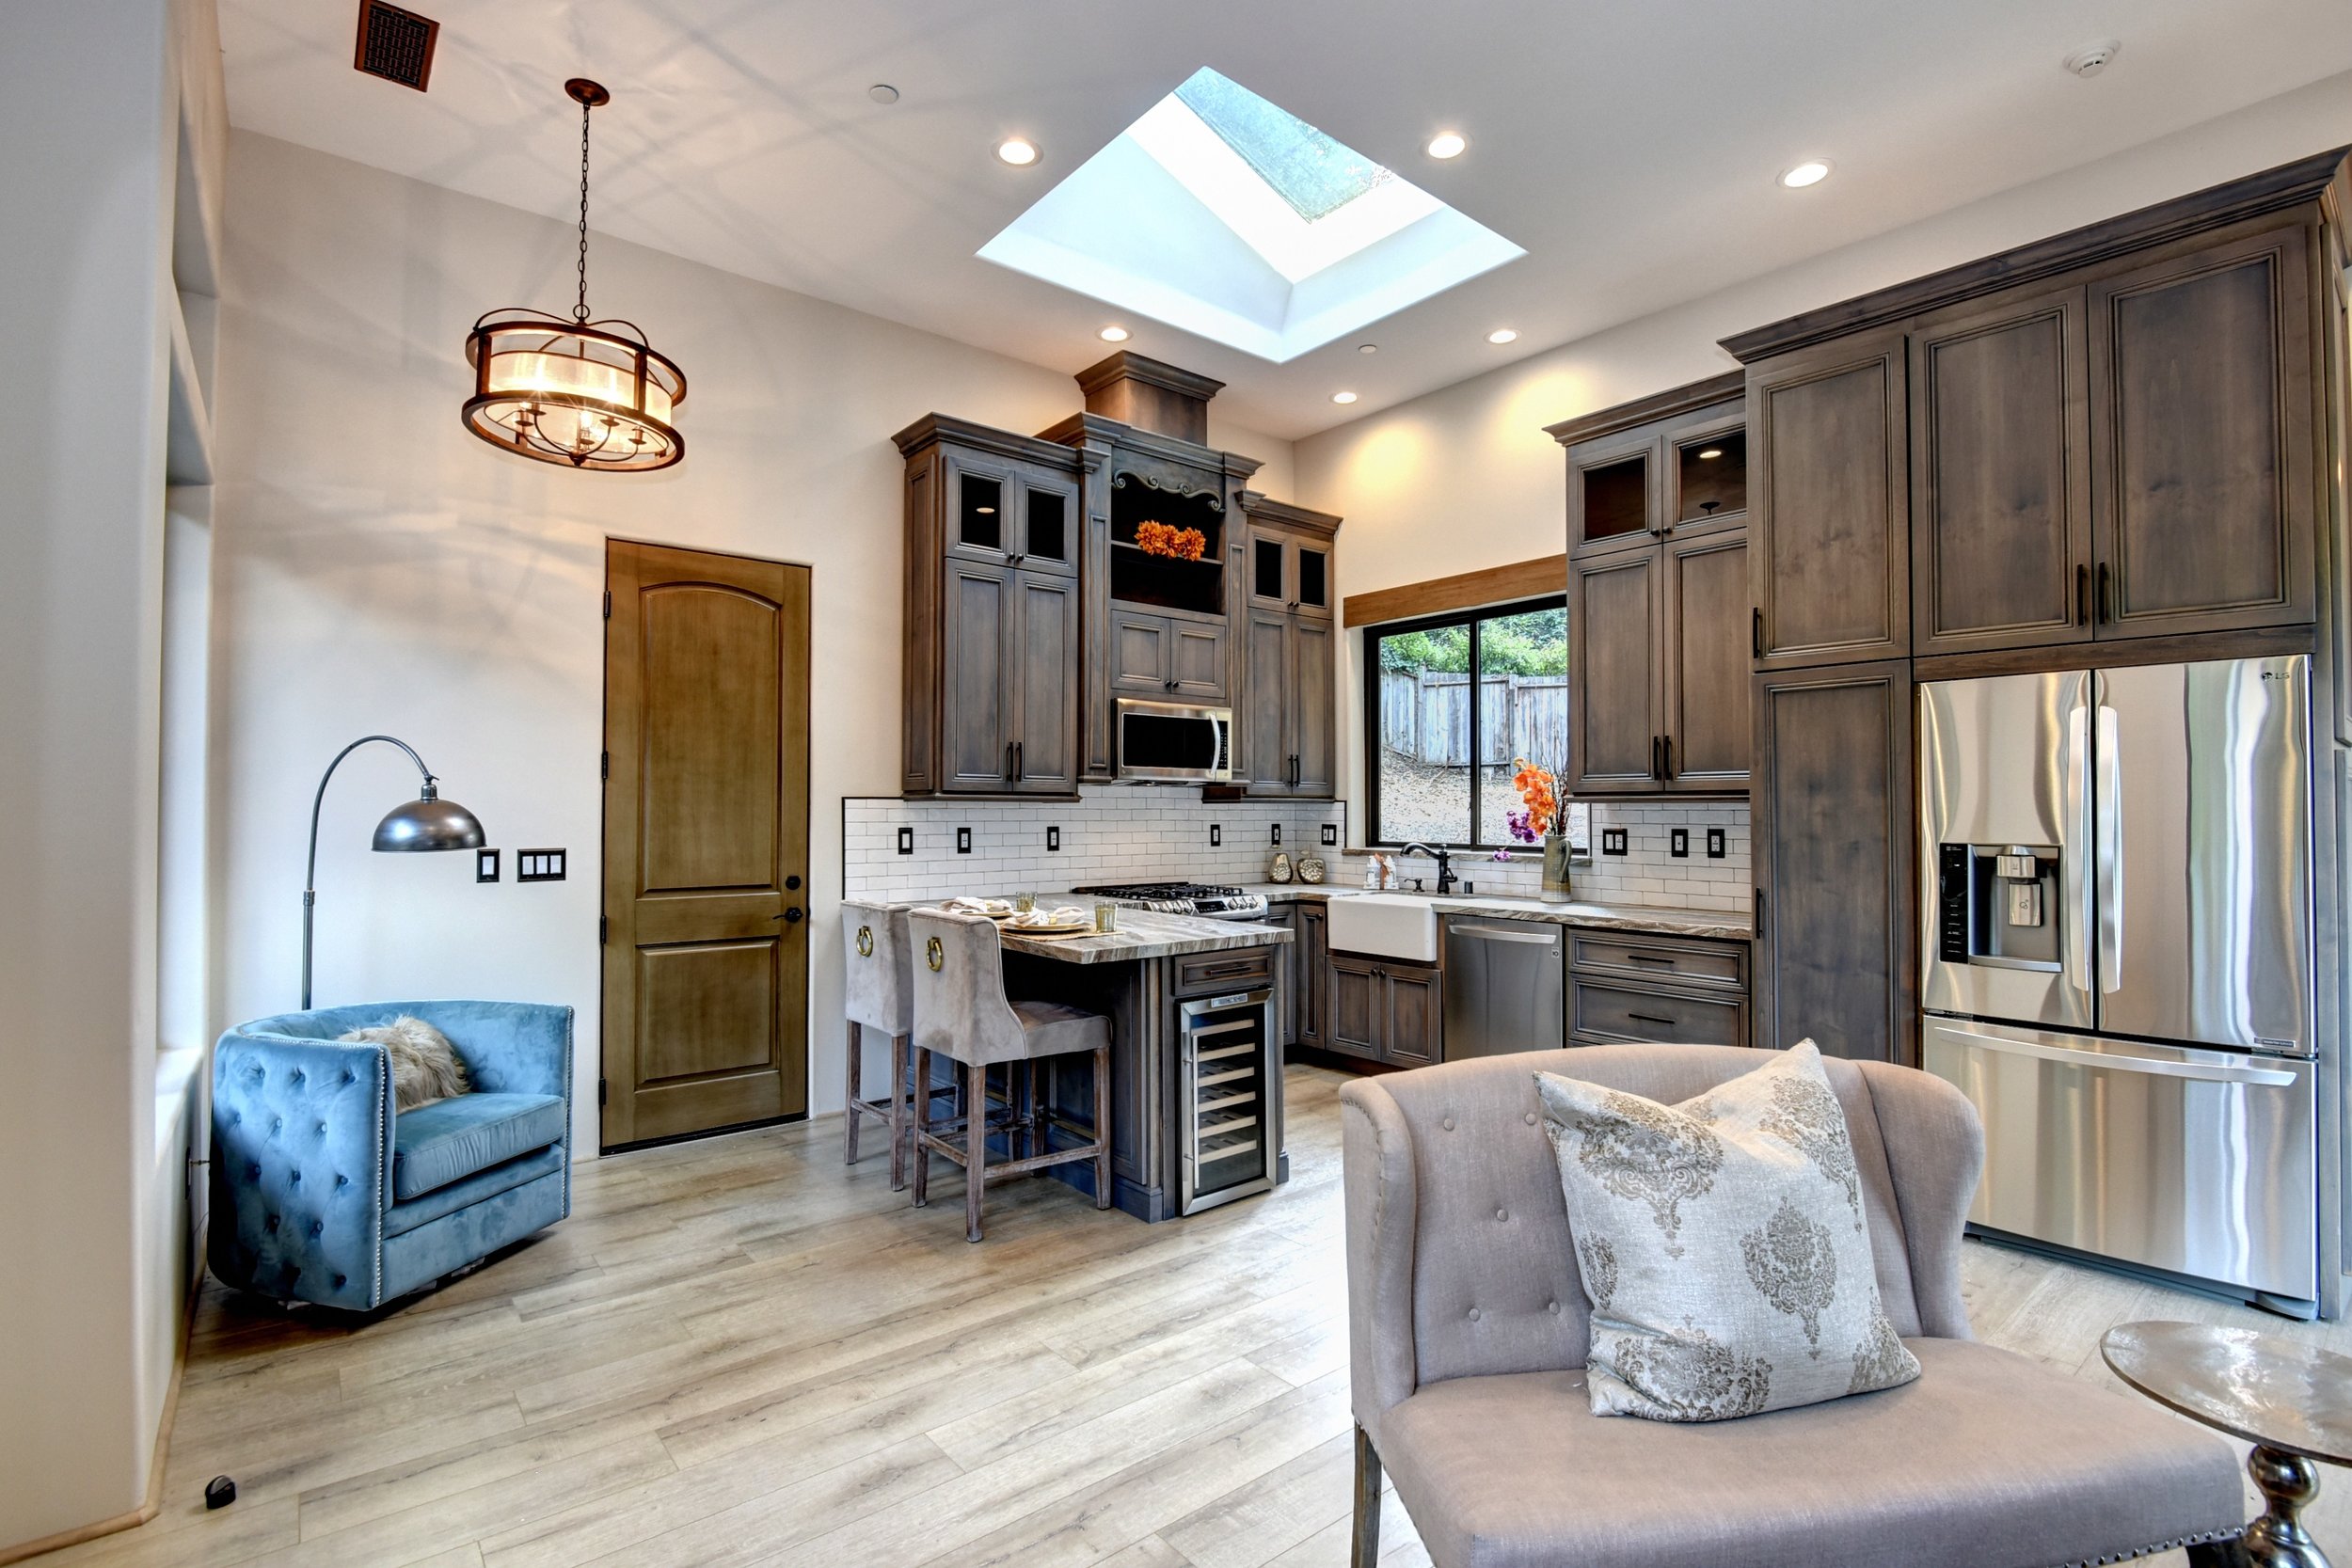  The kitchen in the guest house boasts beautiful hand-stained alder custom cabinetry, two lazy susan cabinets, a pull out pantry, a breakfast bar, and state of the art stainless steel appliances, including a gas range, dishwasher, microwave, refriger